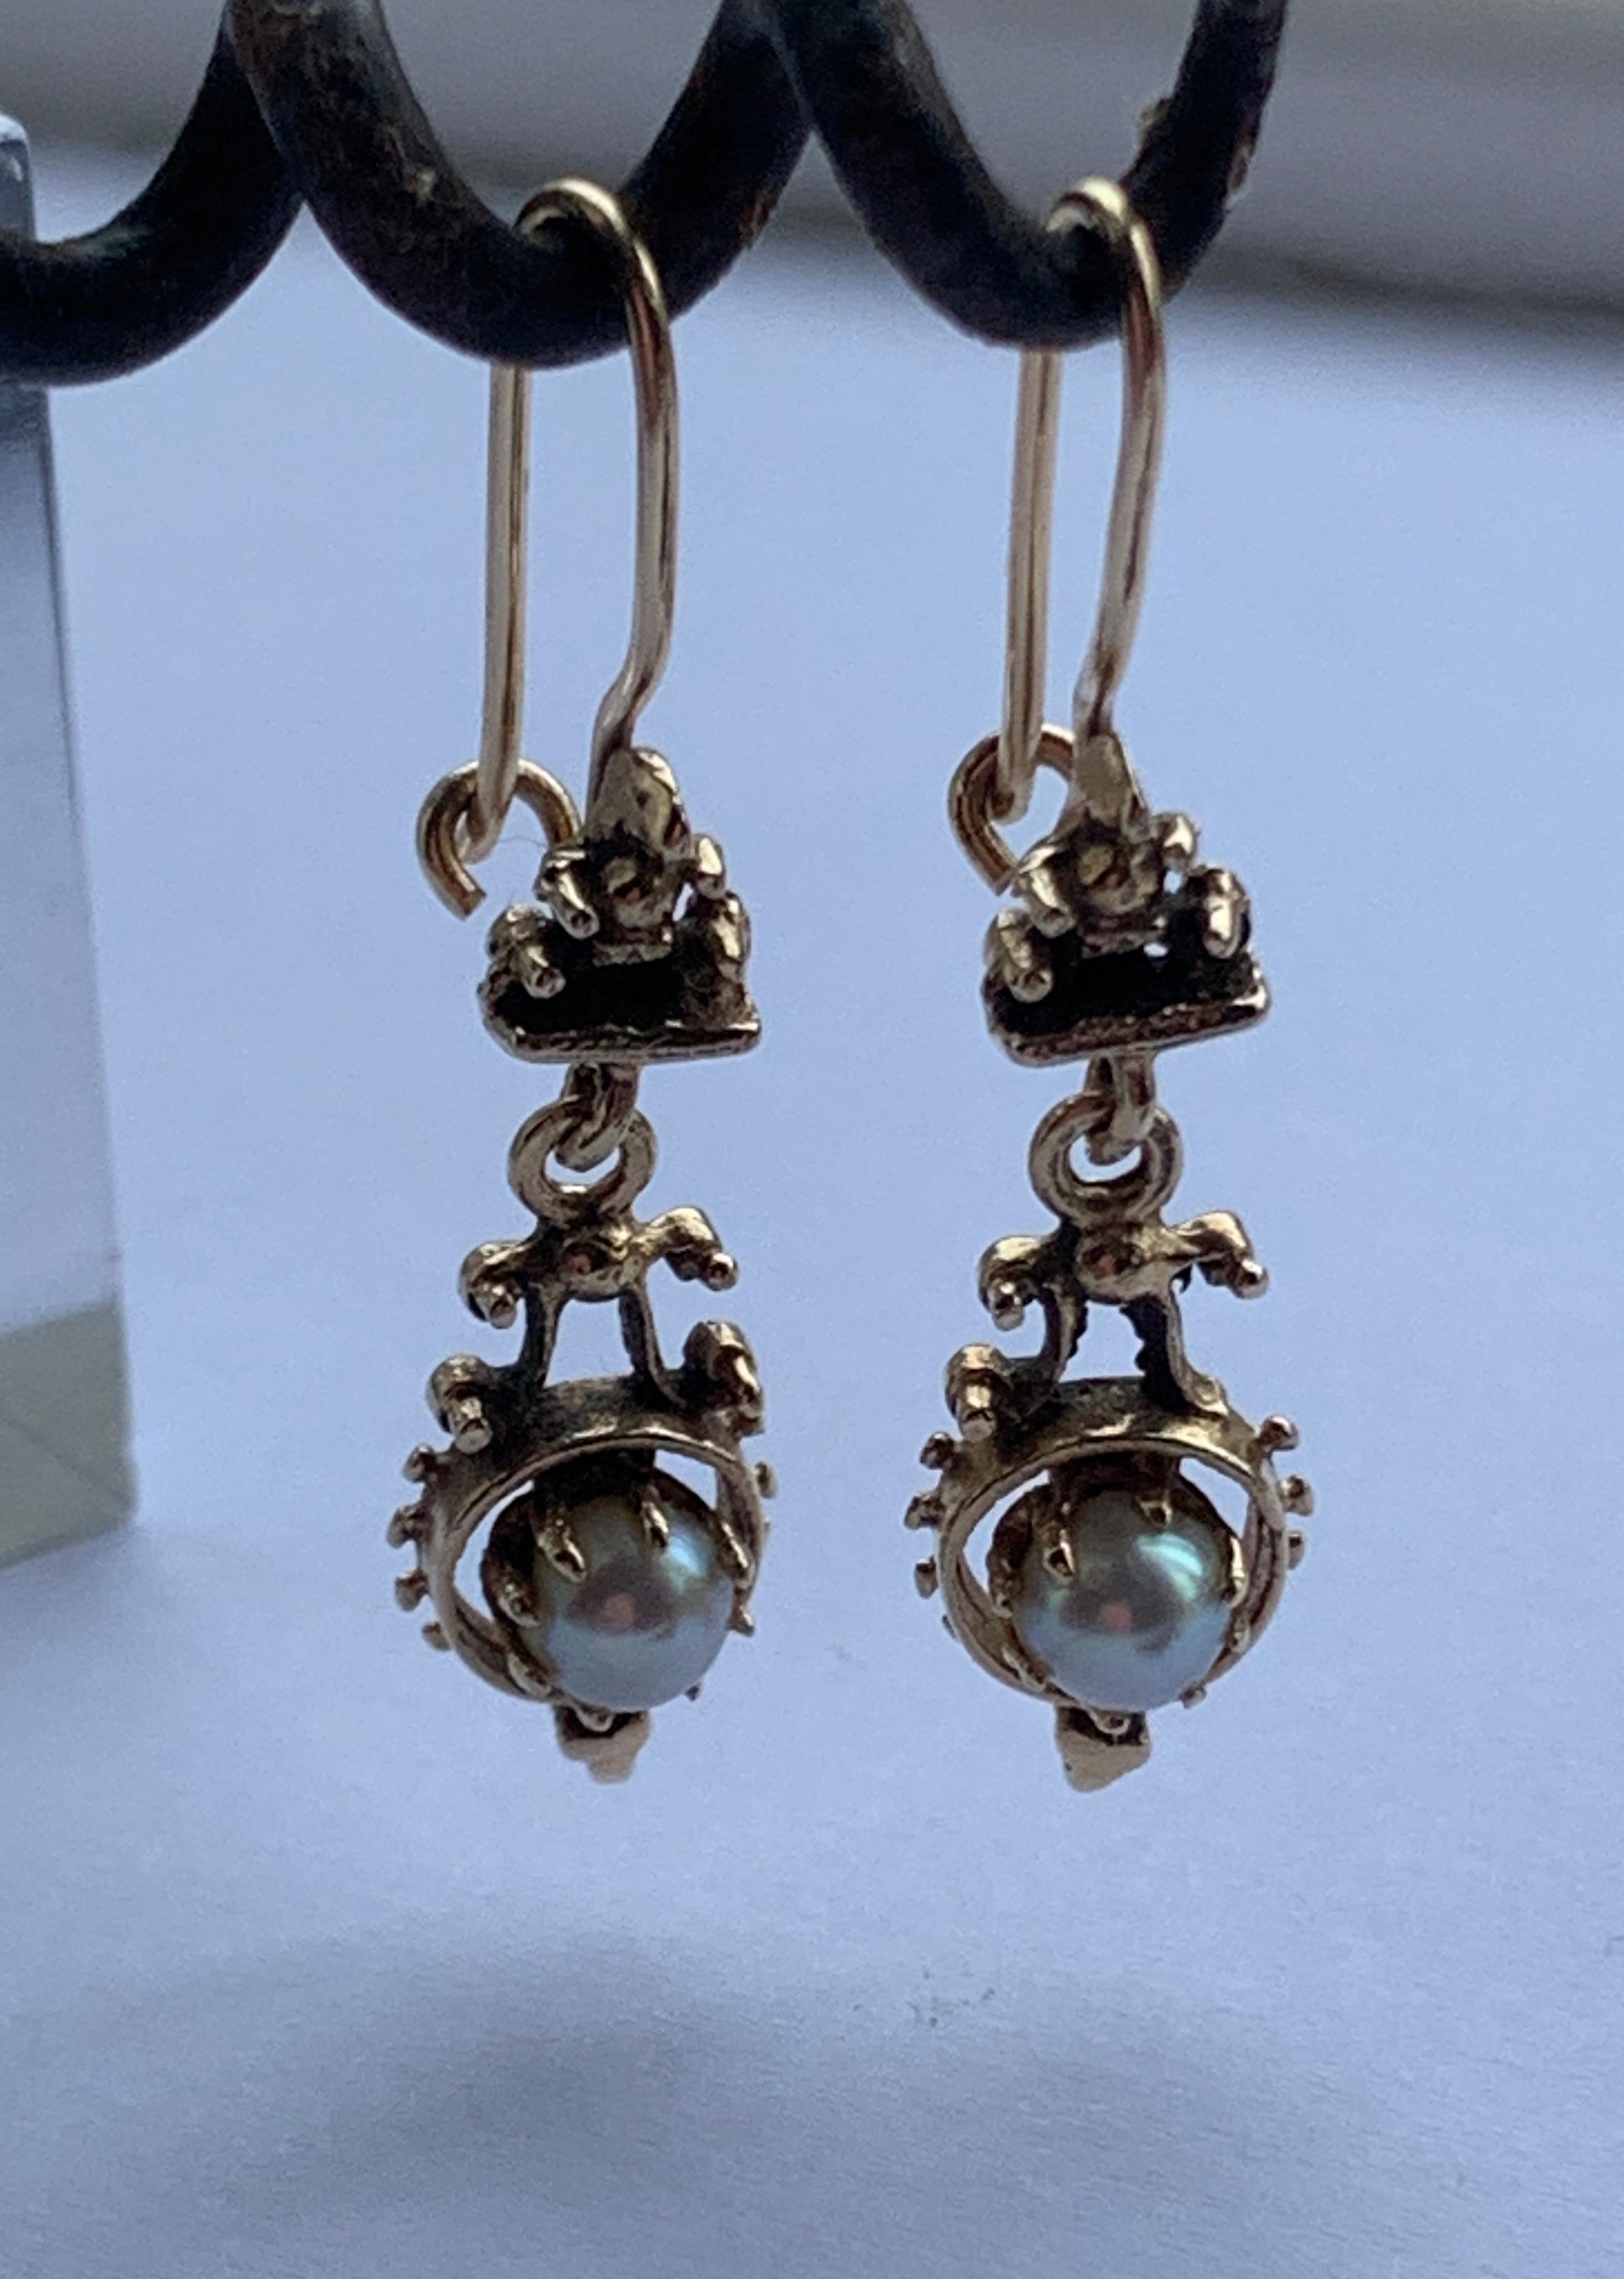 Antique 14ct Gold Pearl Earrings

The pearls are cultured South sea or Akoya Pearls
The style is Rococo & are dated Circa Late 1880s Stamped 14k on reverse

They measure approx 5mm
and are very beautiful and round
also secure in their fitting
-